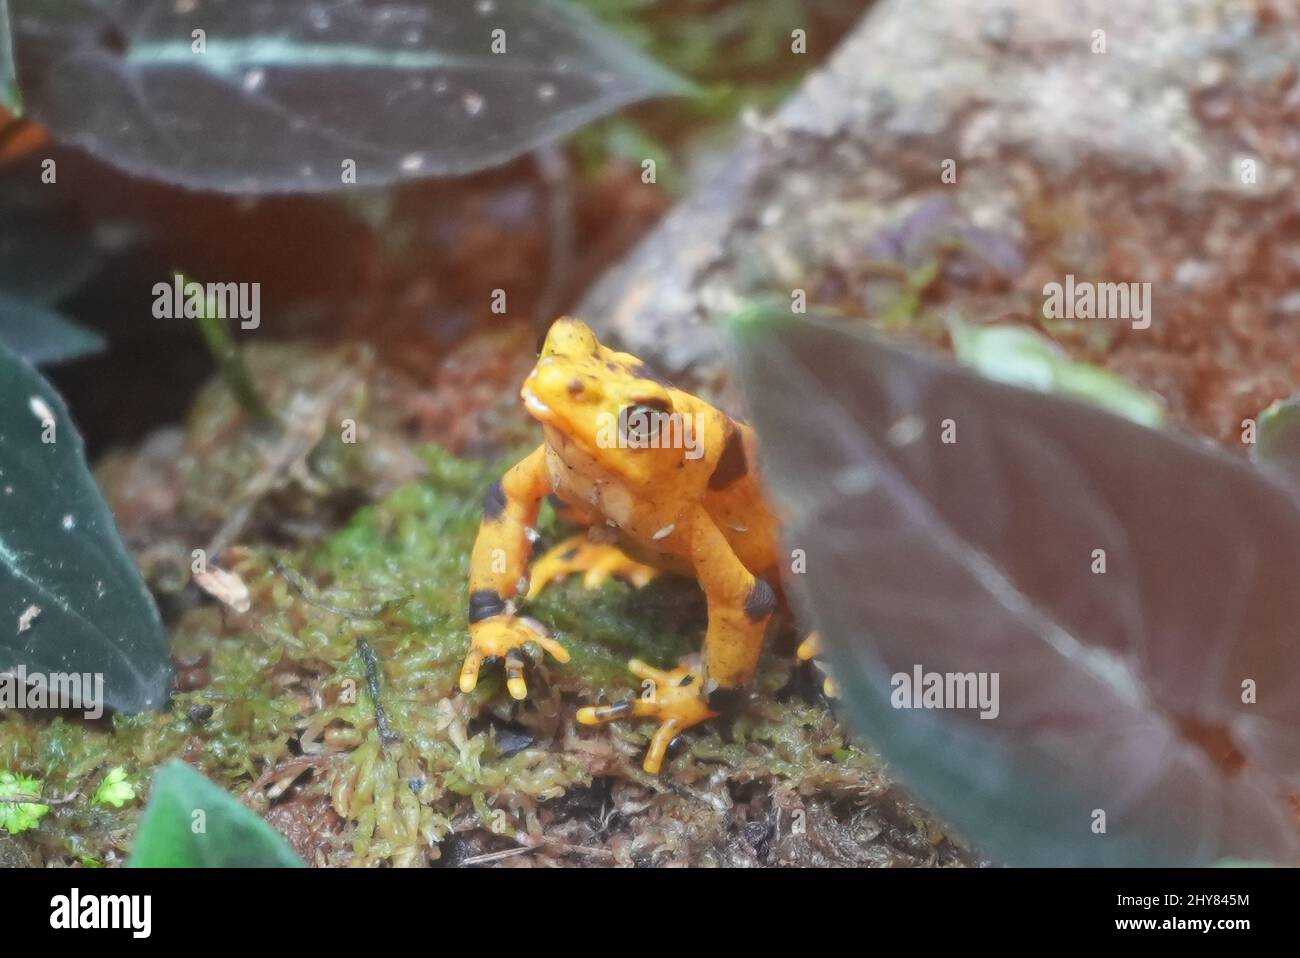 Shallow focus shot of a panamanian golden frog sitting on the ground of the forest in bright light Stock Photo